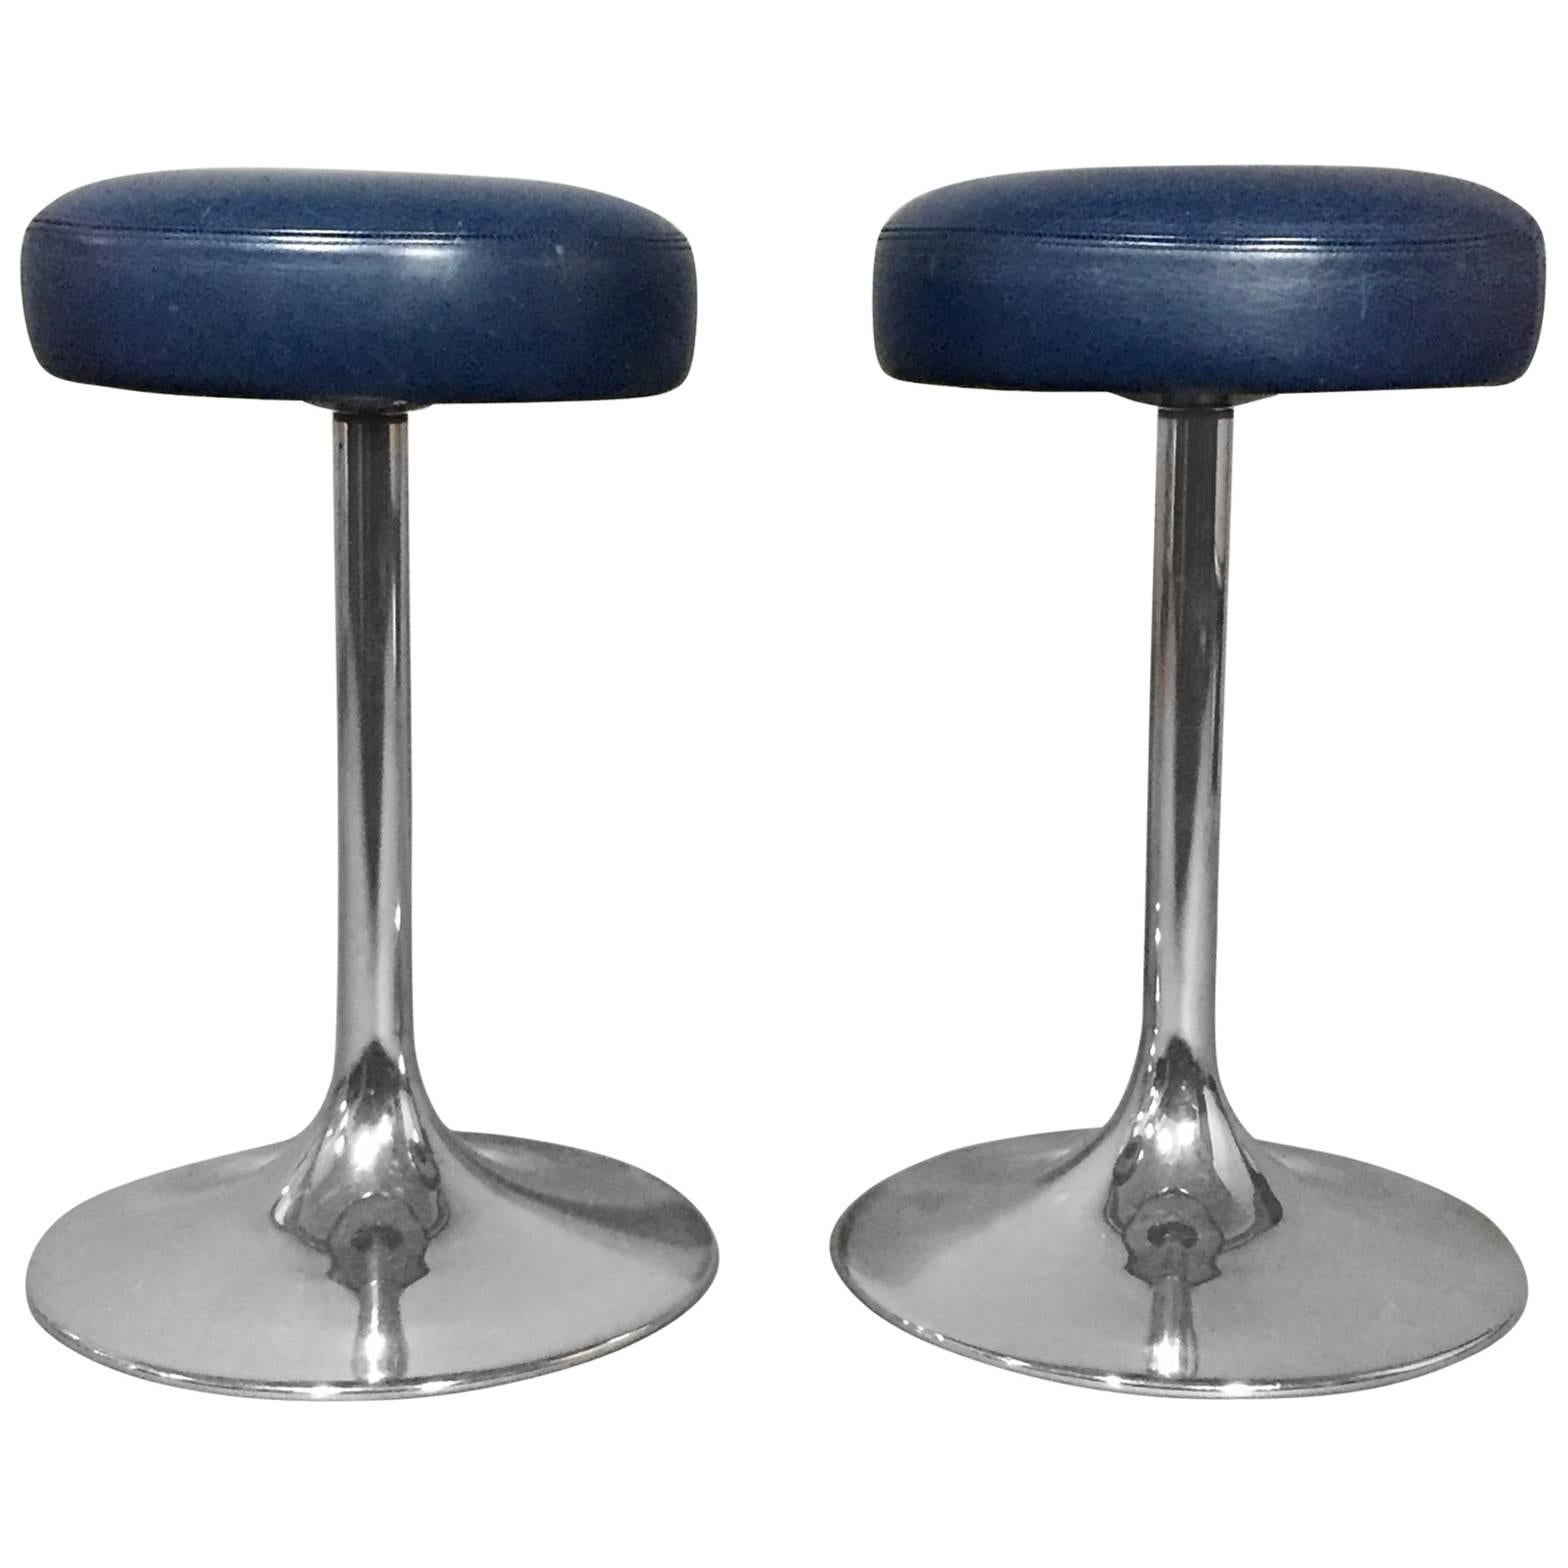 Pair of Johanson Design Chrome and Leather Stools, Sweden, 1970s For Sale